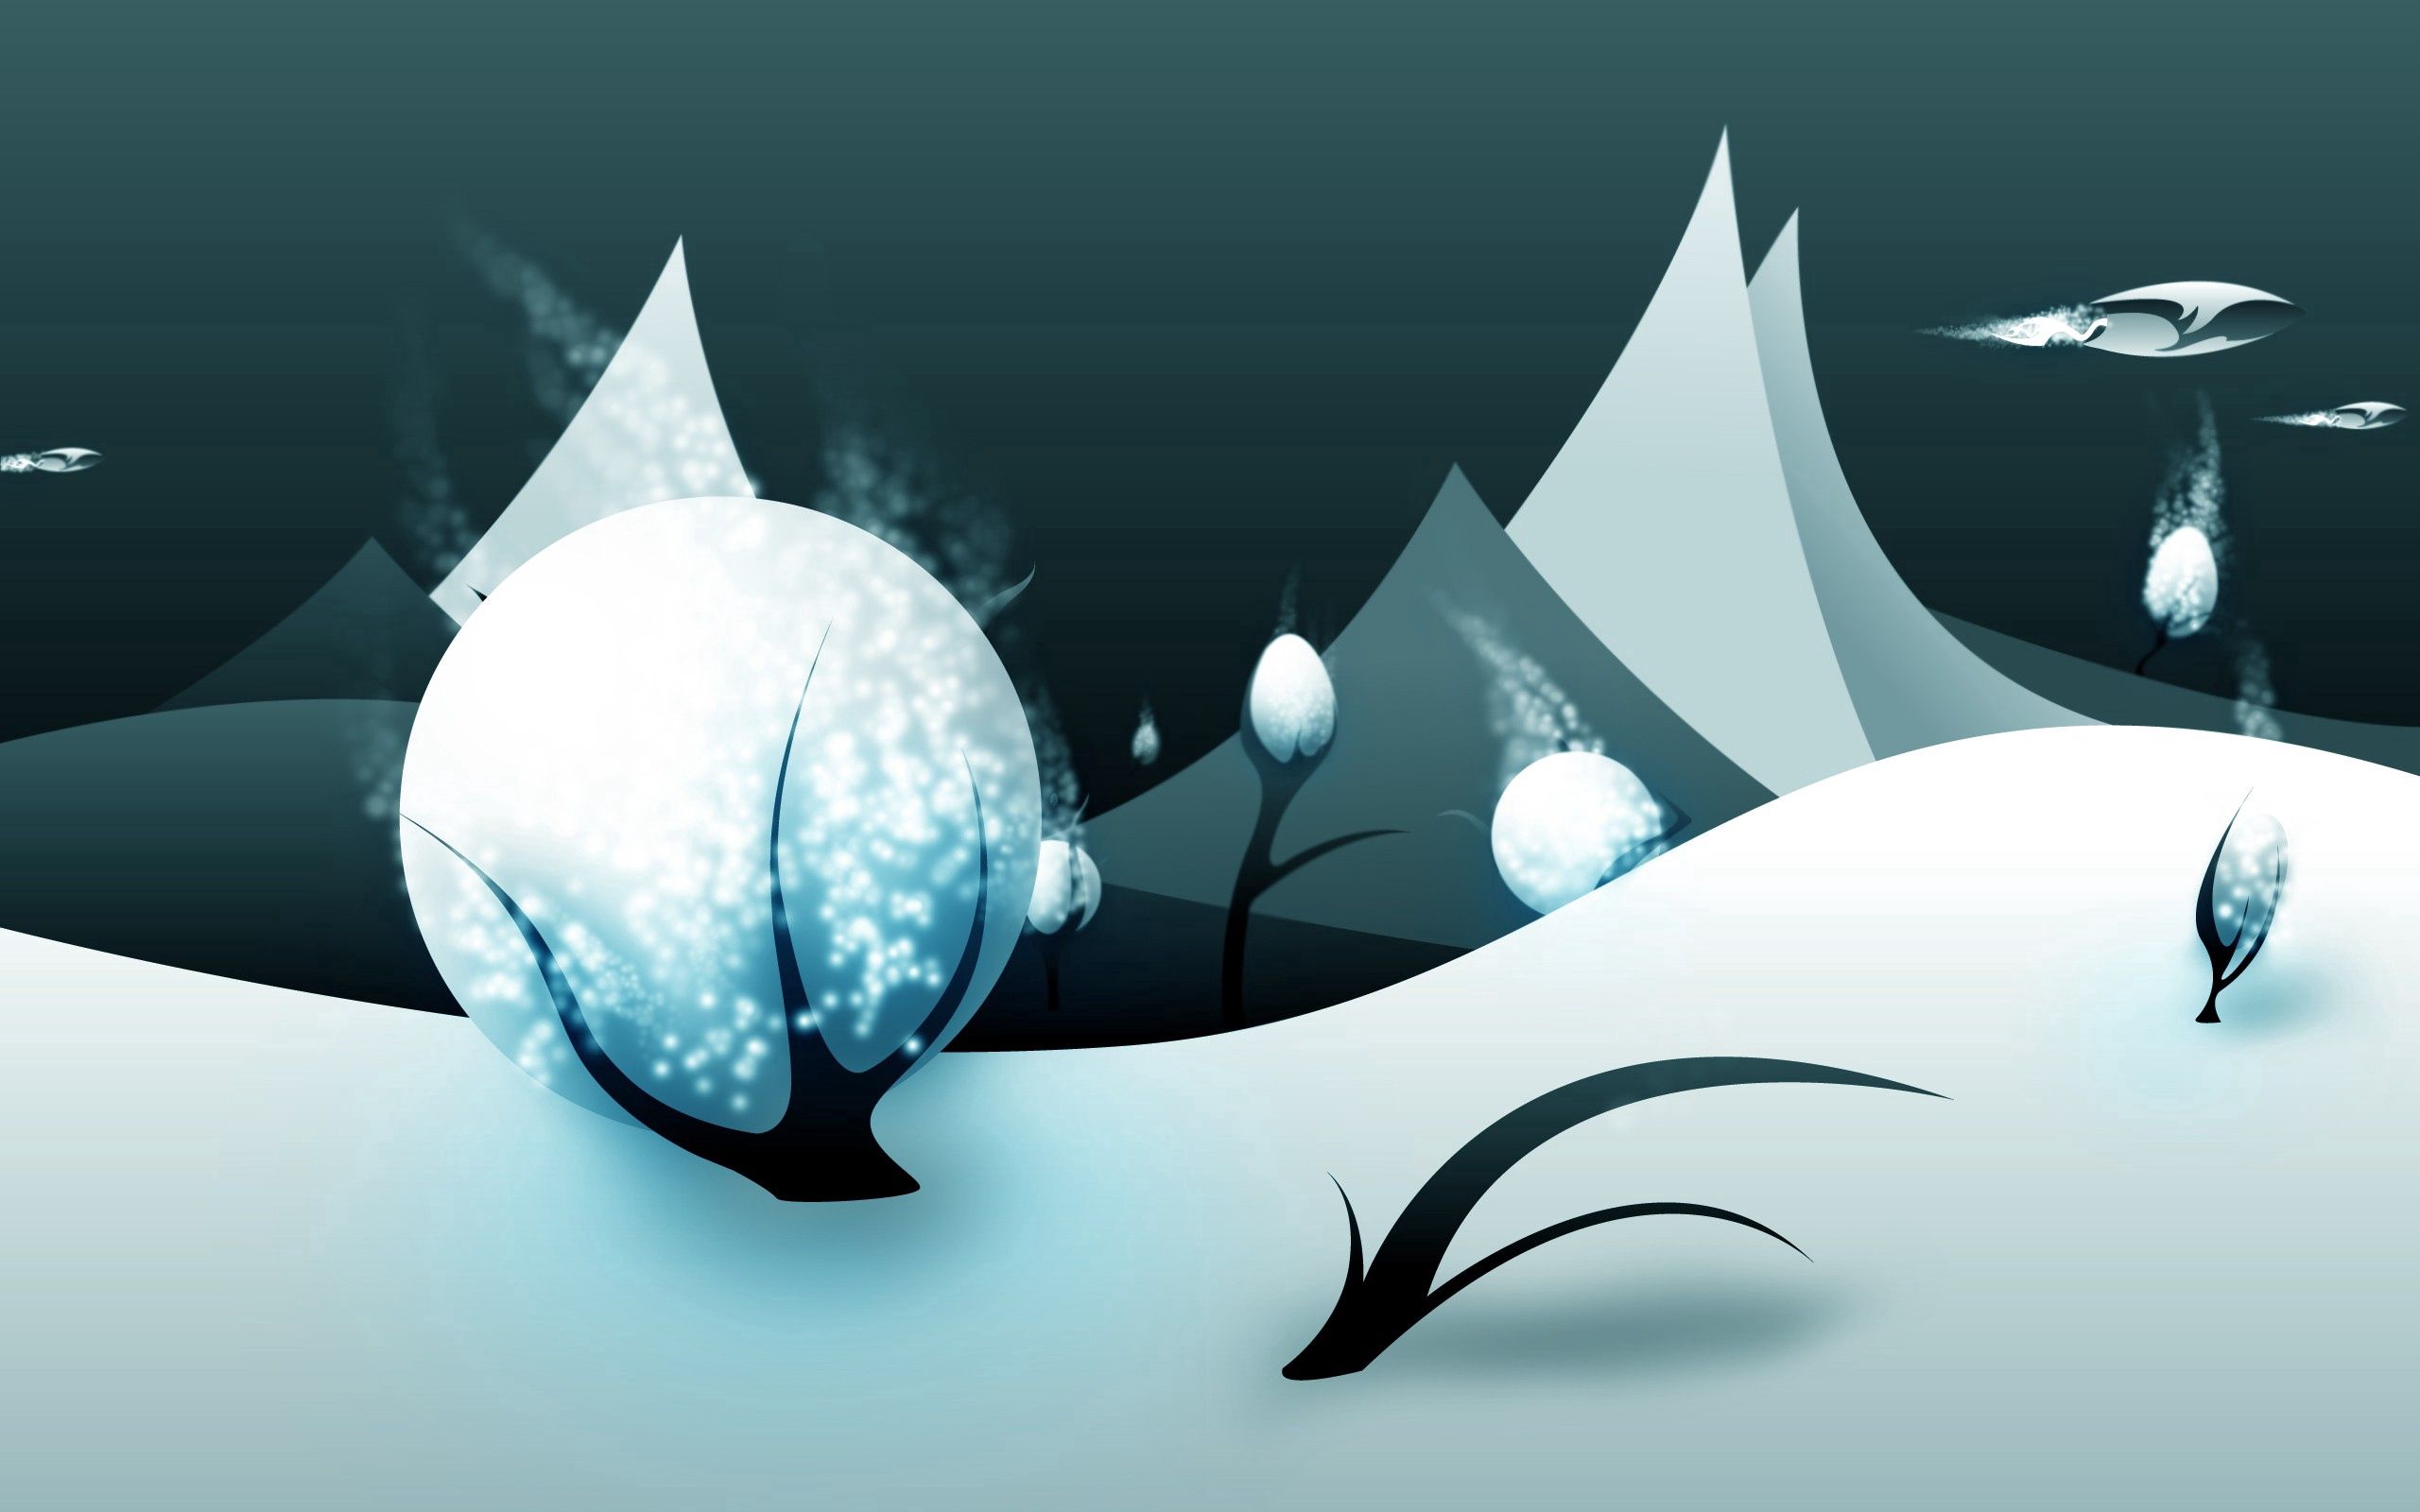 android winter, trees, snow, vector, wind, lump